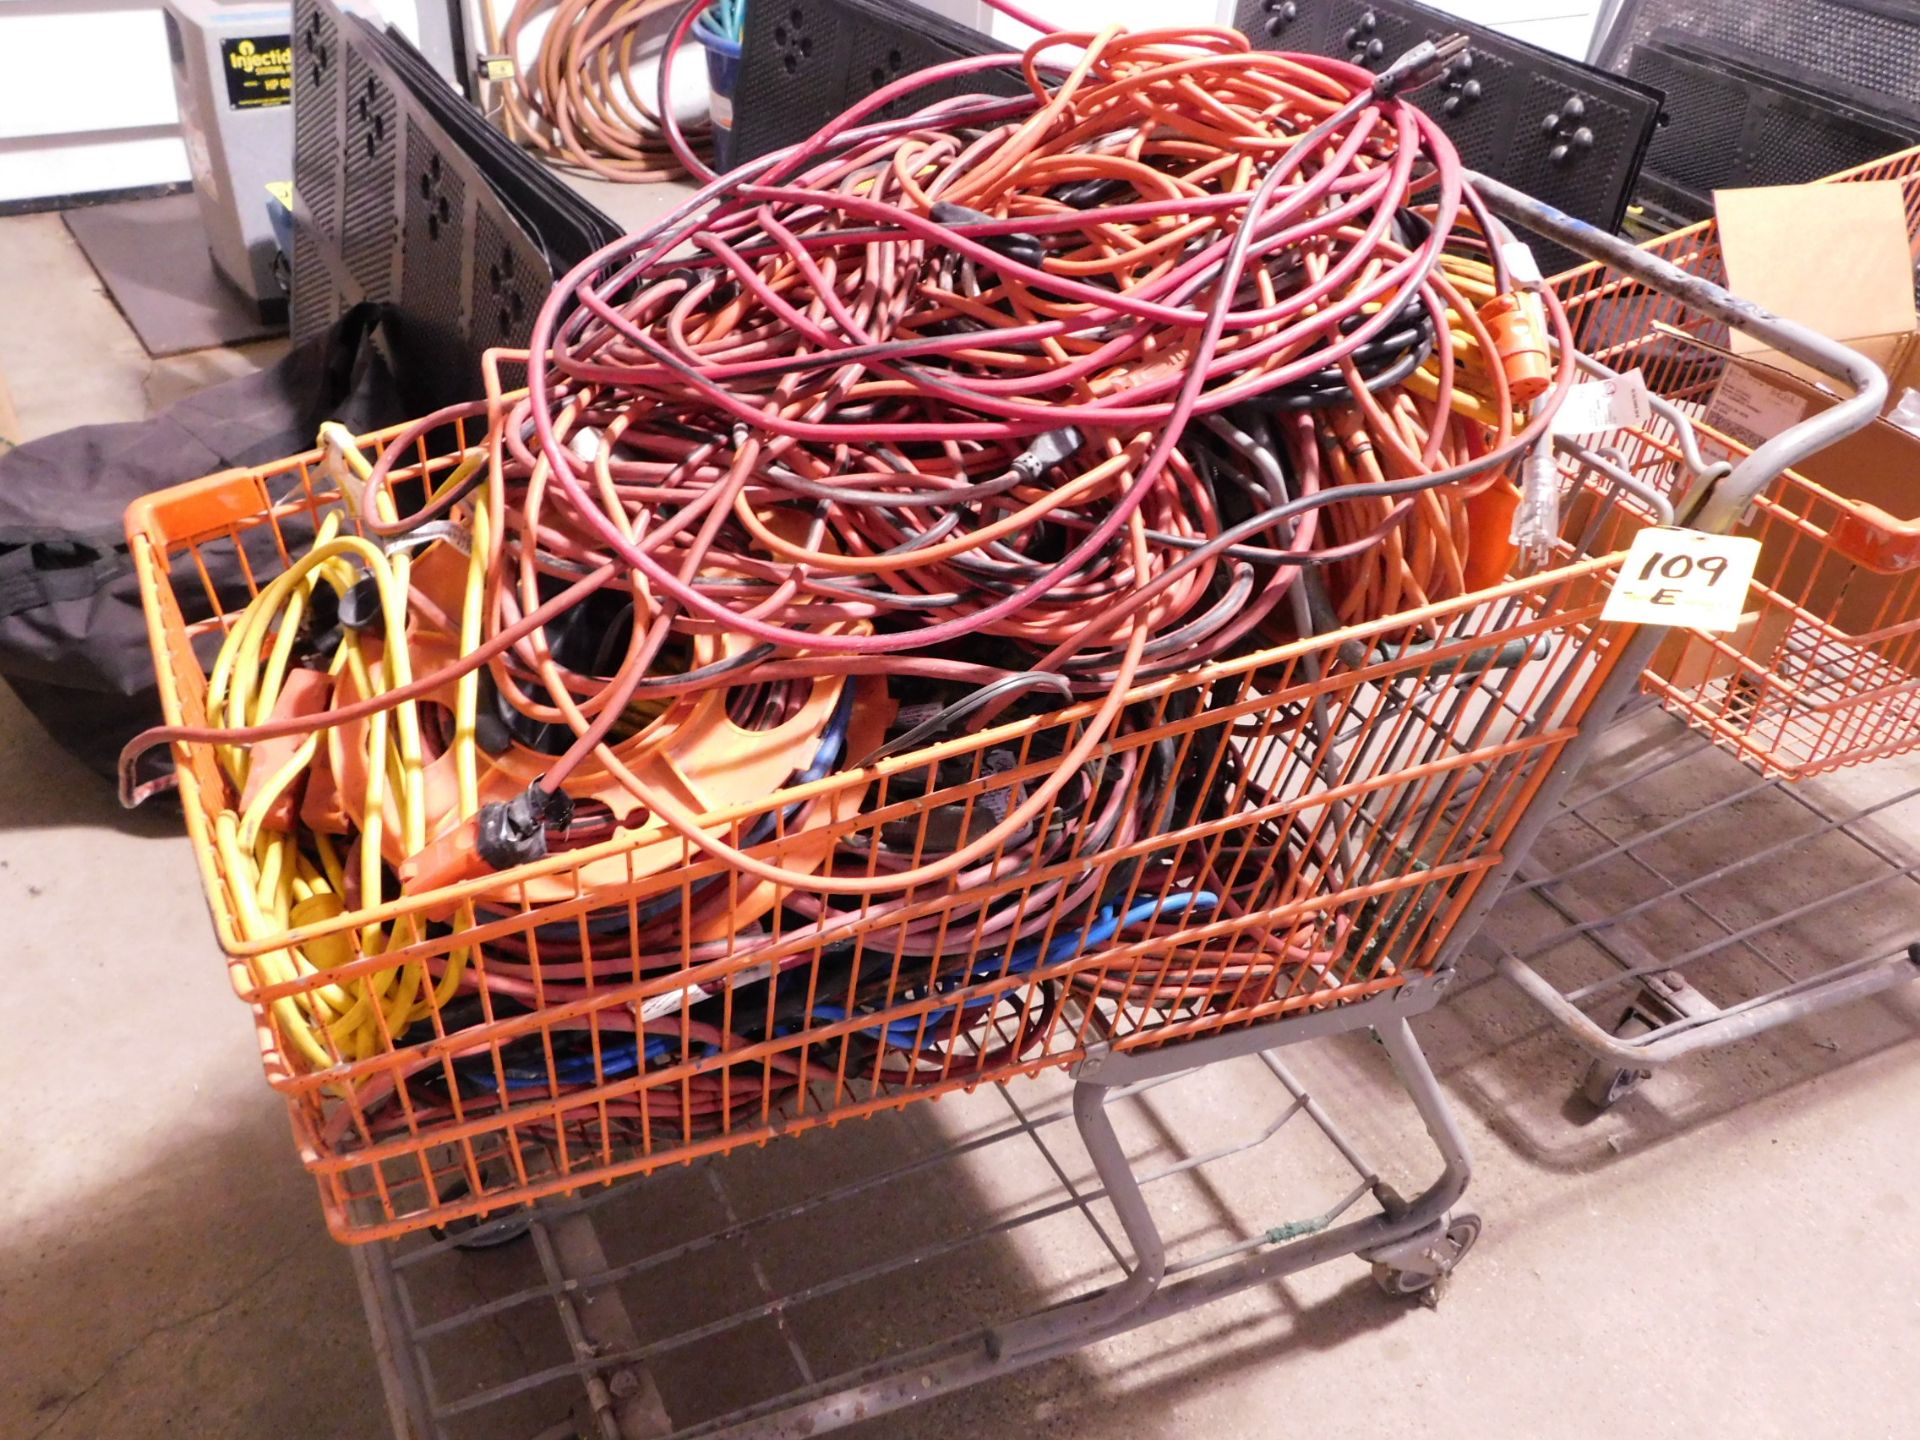 Extension Cords and Shopping Cart